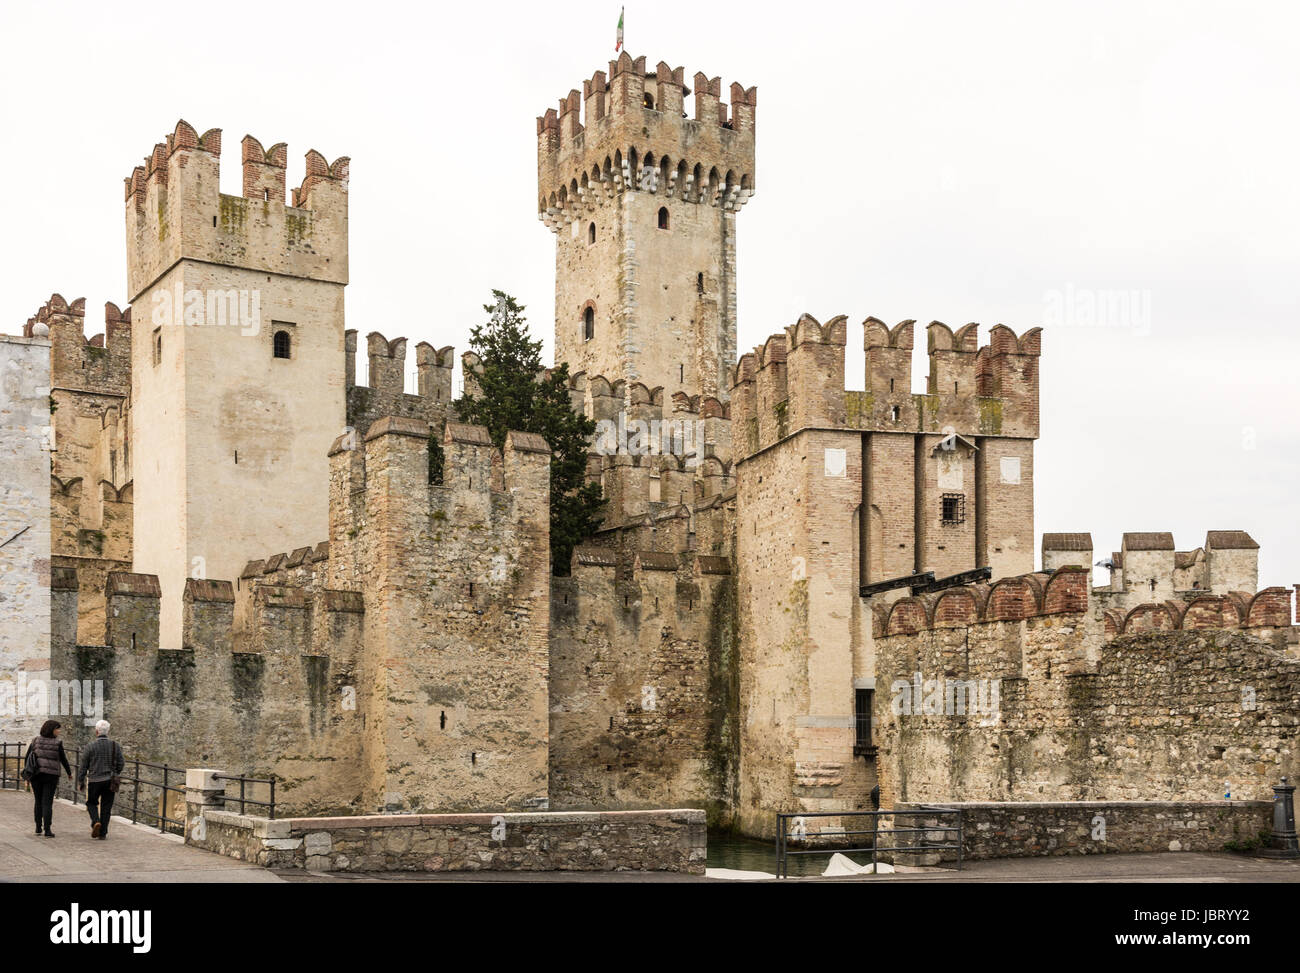 SIRMIONE, ITALY - APRIL 23: Tourists at Scaliger Castle in Sirmione, Italy on April 23, 2014. The castle was built in the 13th century. Foto taken from Piazza Castello Stock Photo